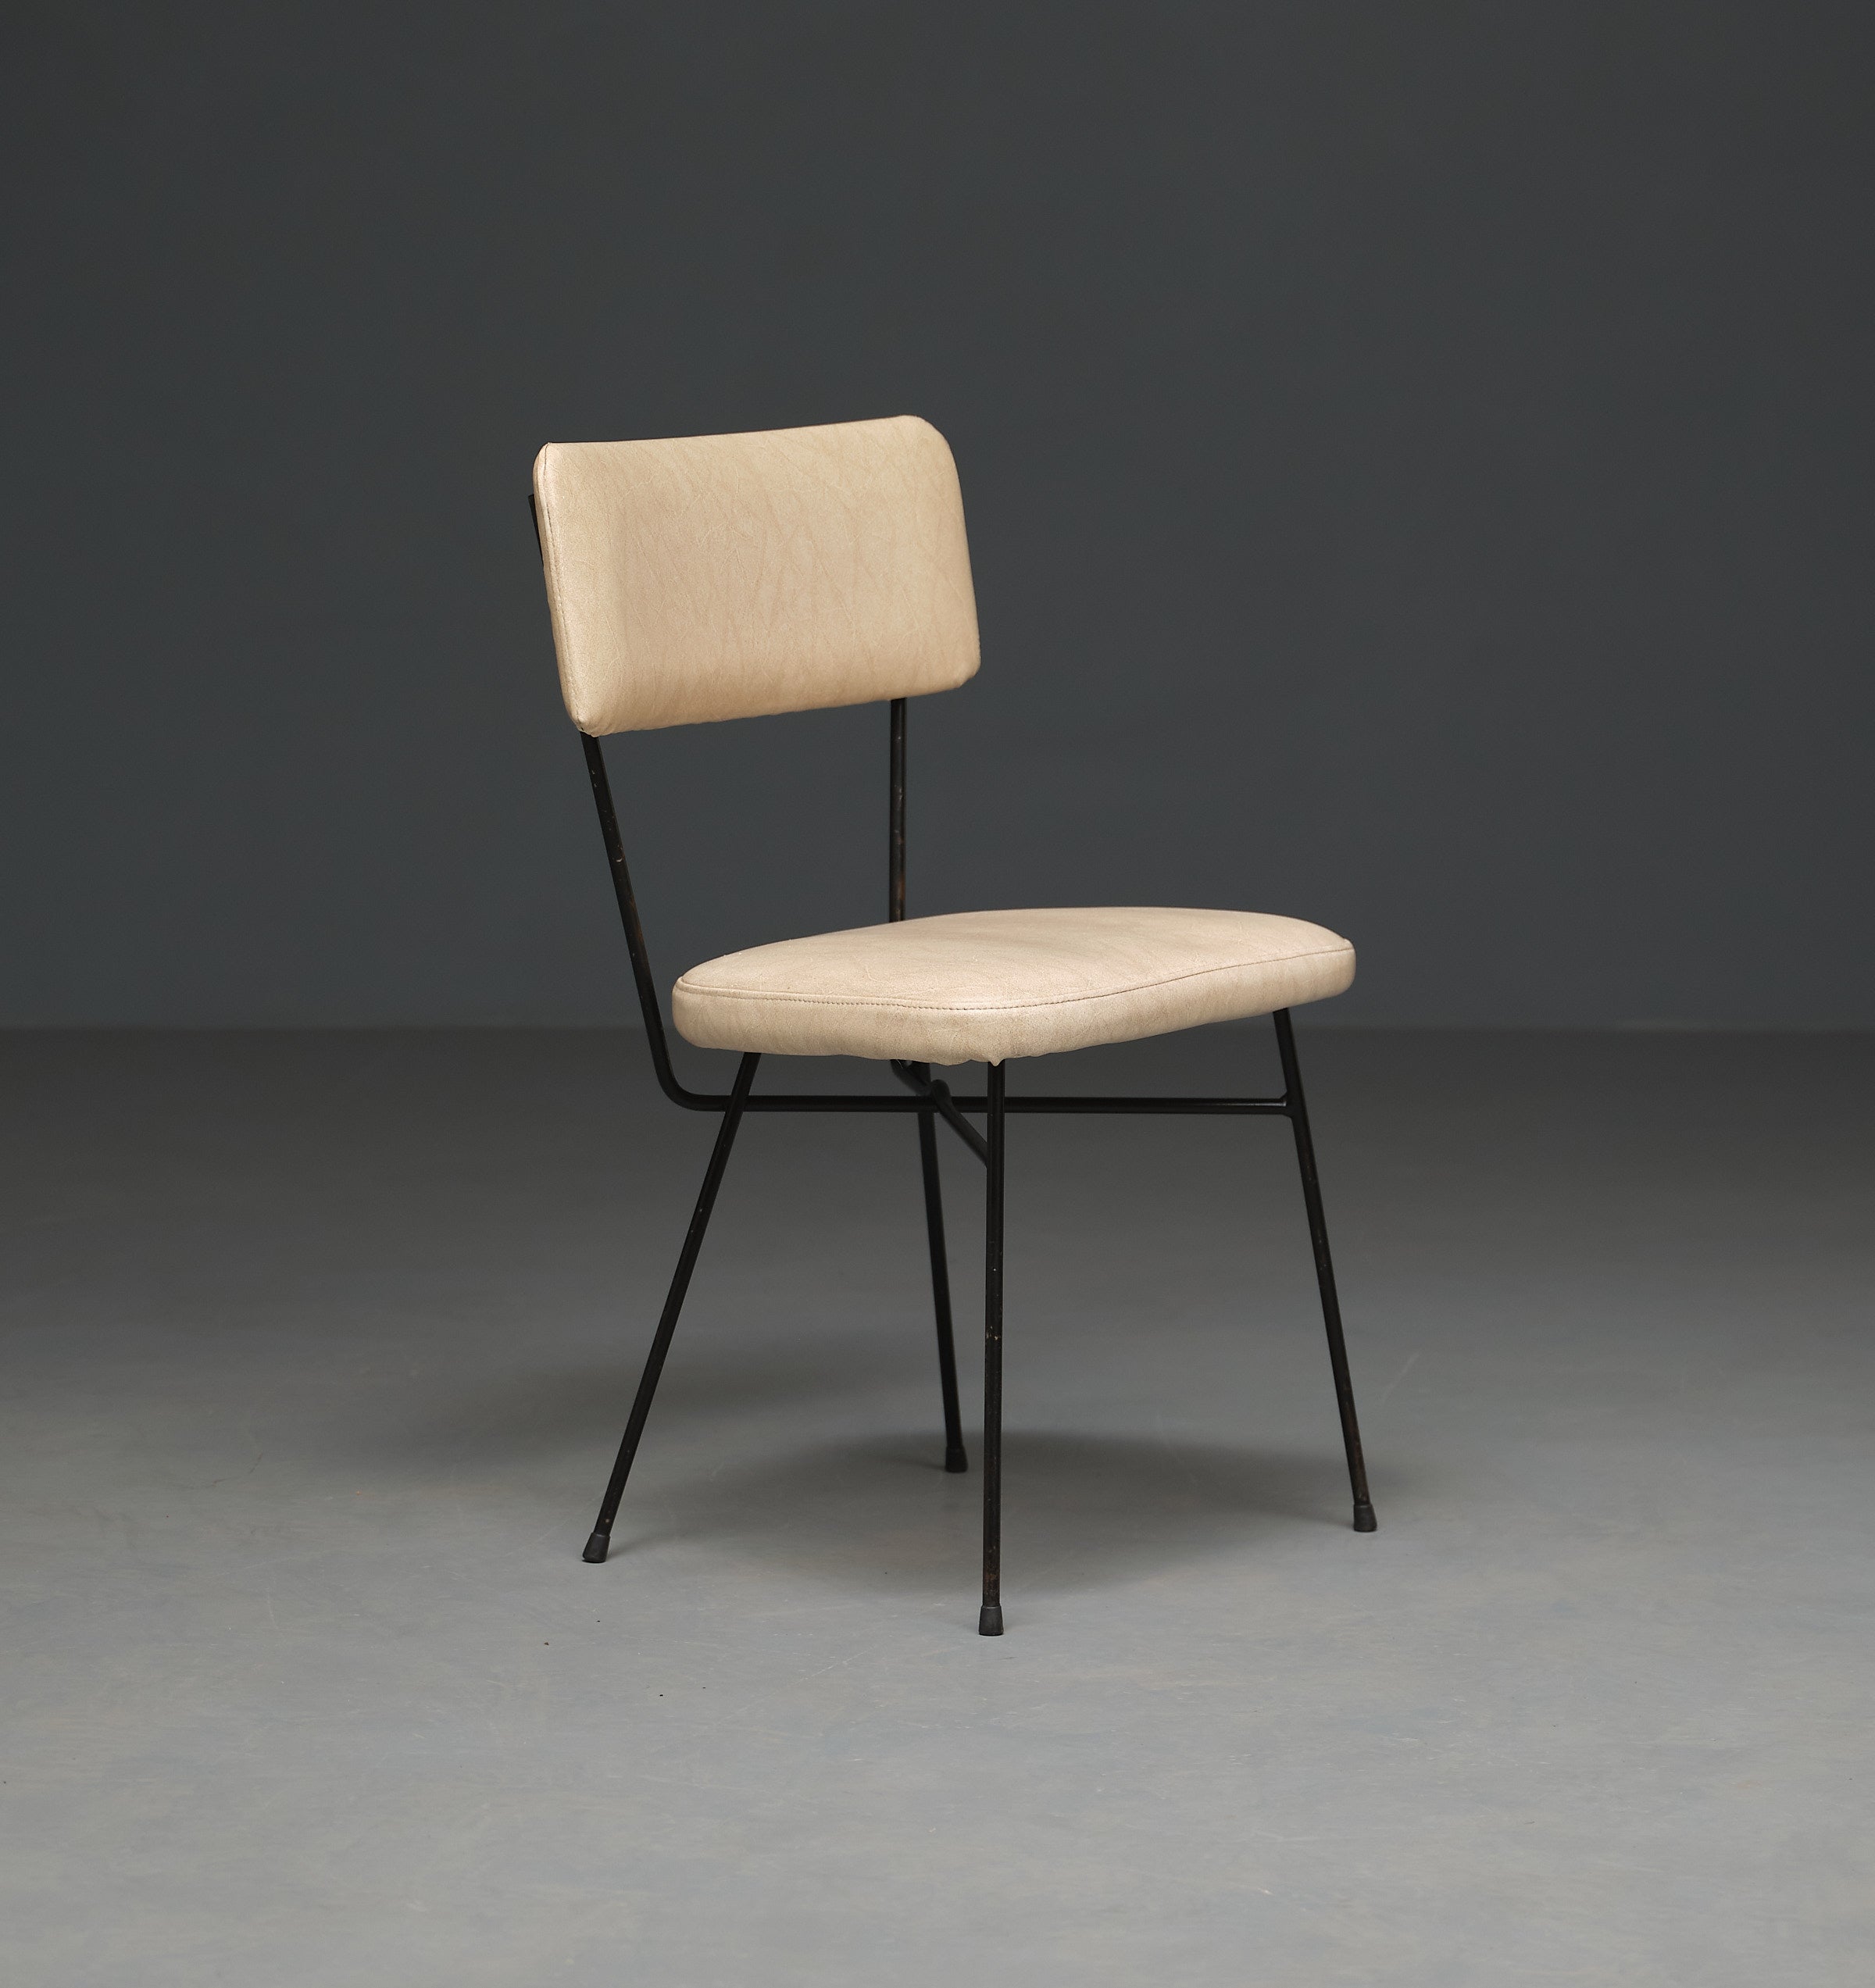 Presenting iconic vintage chair designed by the renowned studio BBPR for Arflex, originating from the enchanting 1950s. These timeless classics radiate a unique charm that promises to enhance your interior decor.

These chair feature a robust